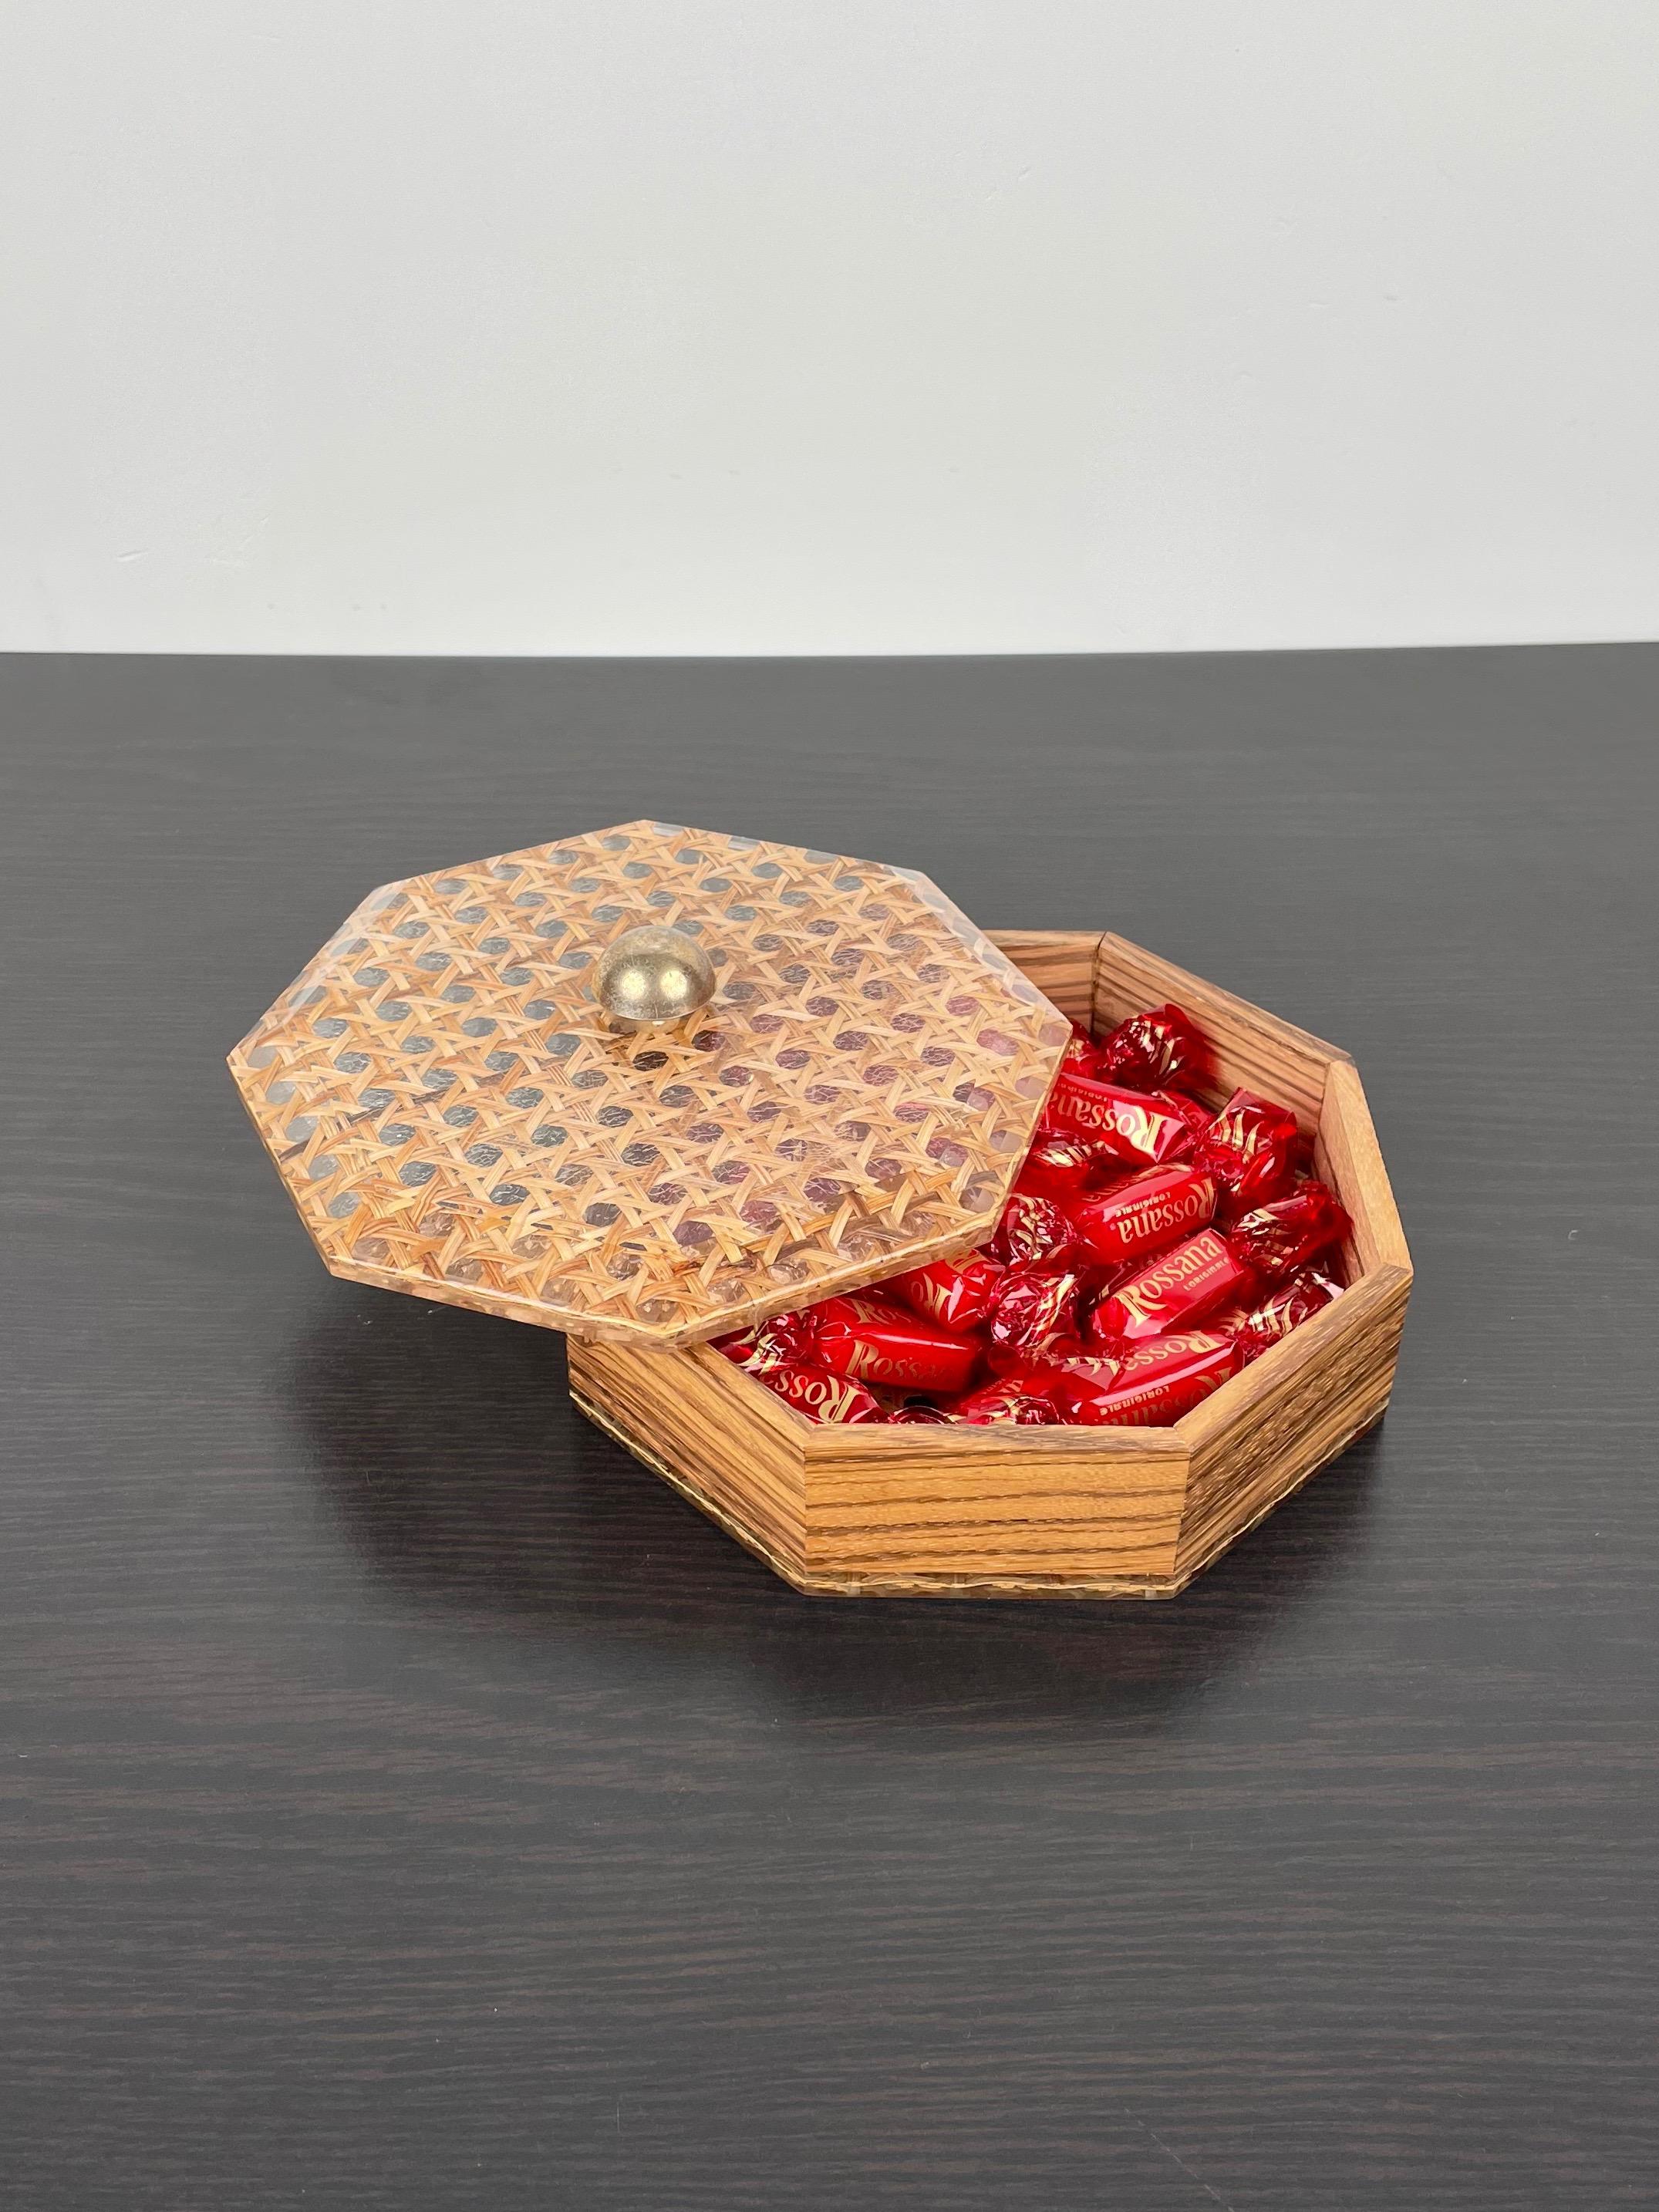 Octagonal Box in Lucite Wicker Wood and Brass Christian Dior Style, France 1970s For Sale 1